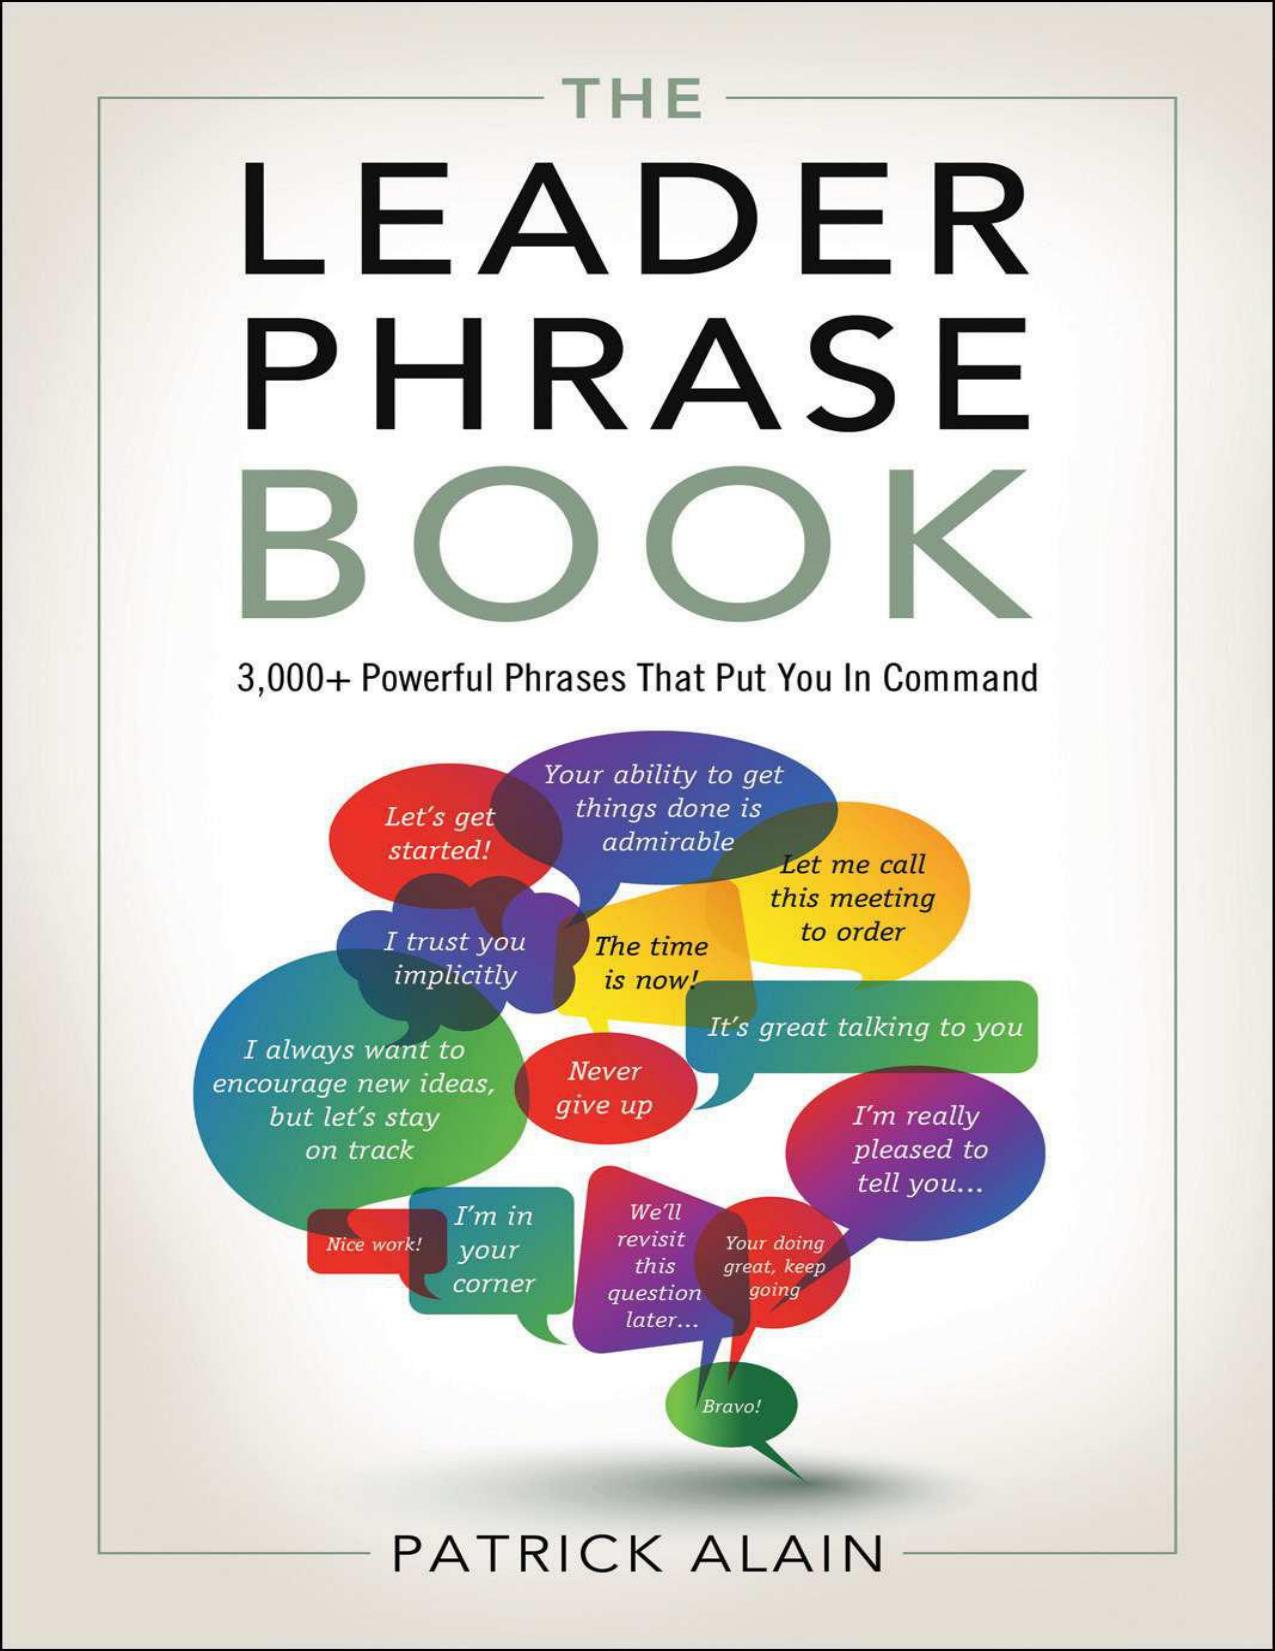 The Leader Phrase Book by Alain Patrick